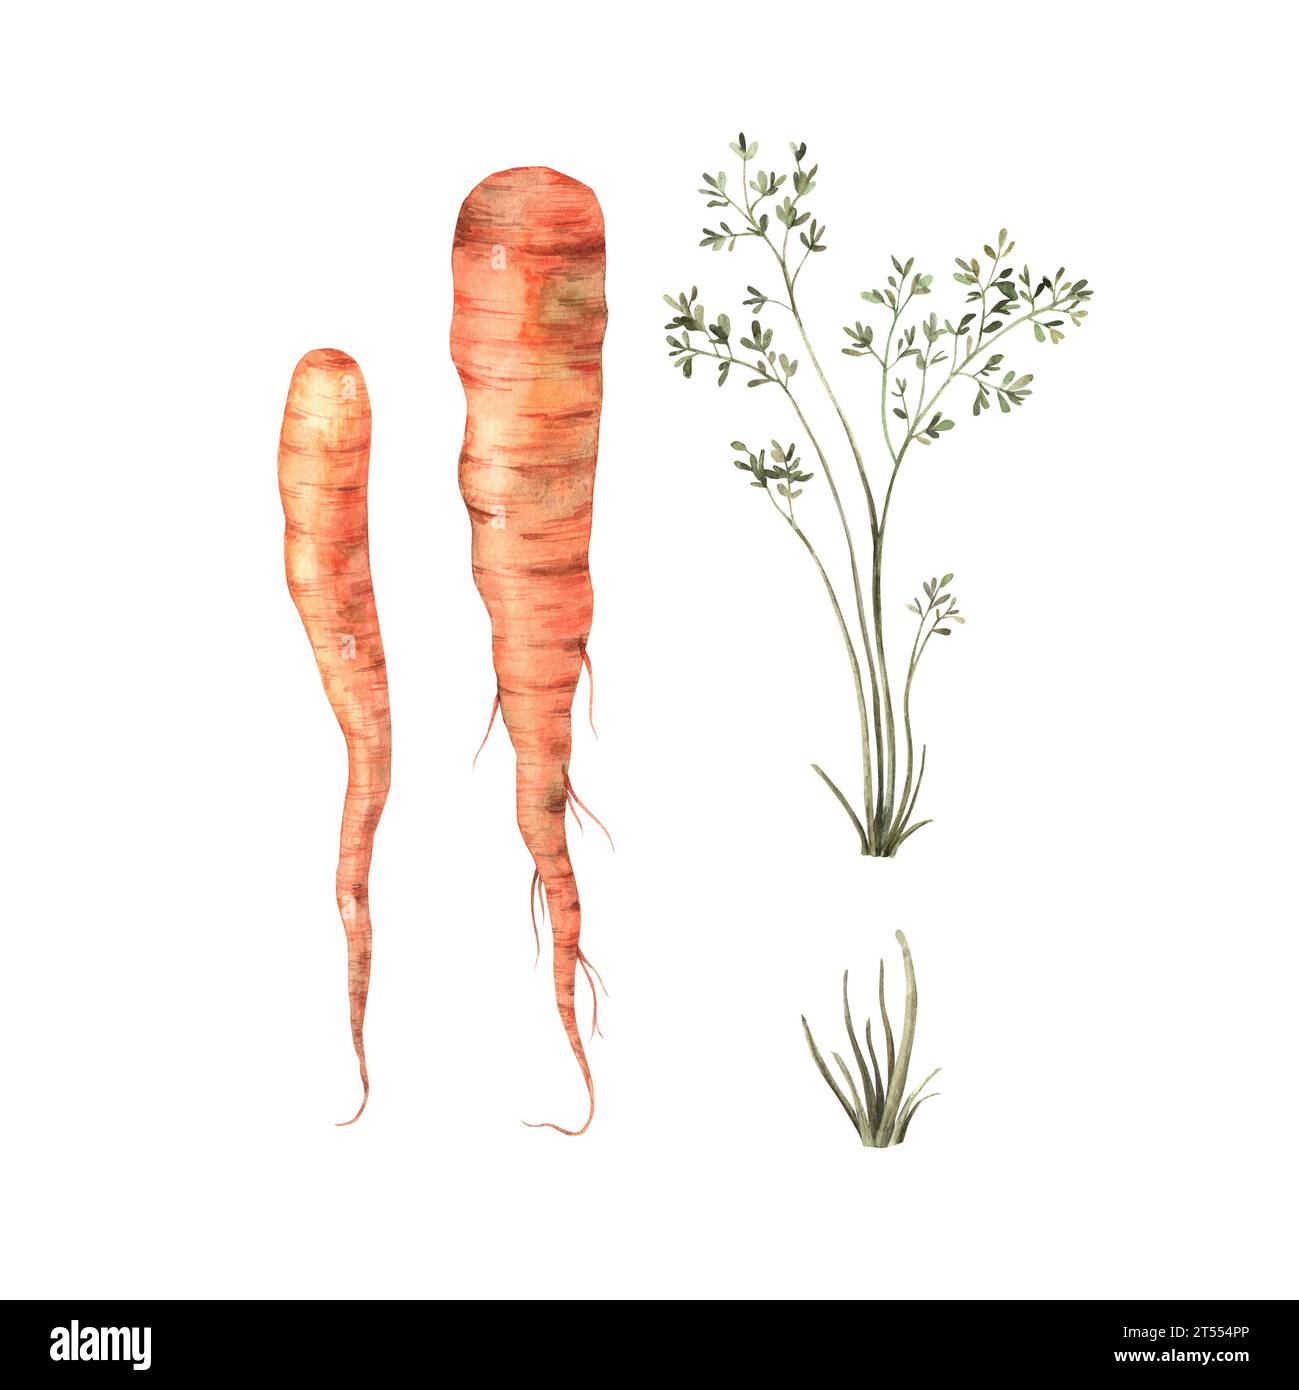 Watercolor hand drawn carrots on a white background, isolate. Use for print design, cards, fabric, menus. Stock Photo